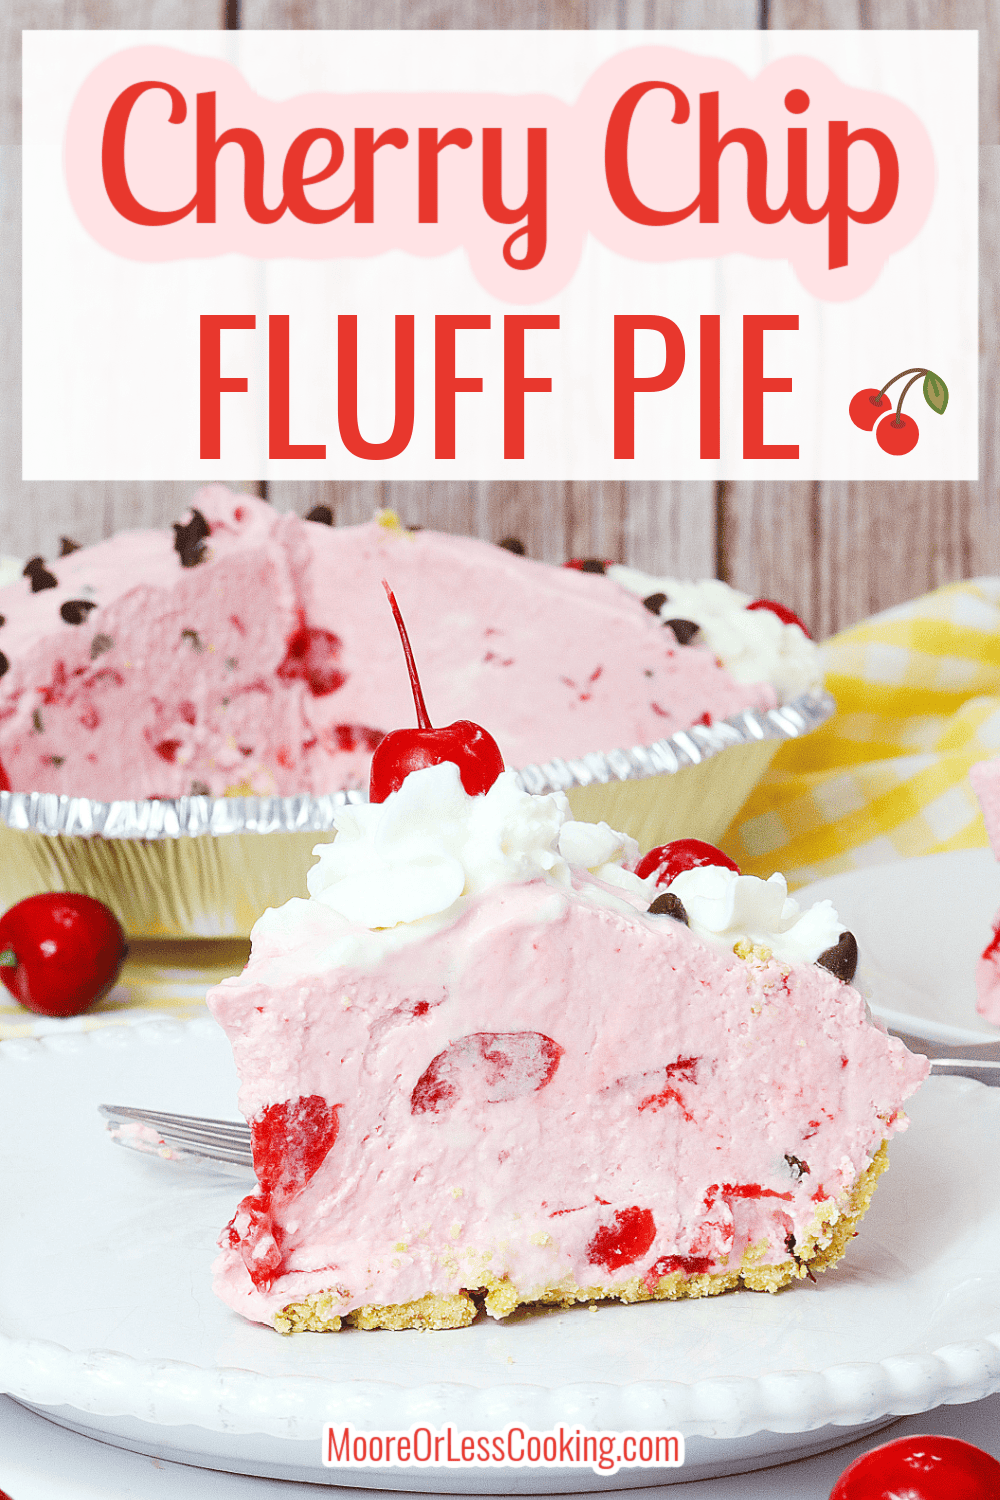 It's got a crunchy crust, and a light, thick, fluffy filling, with sweet chocolate chips and Maraschino Cherries to top it off. It's almost like your favorite ice cream sundae all wrapped up in a scrumptious piece of pie. via @Mooreorlesscook